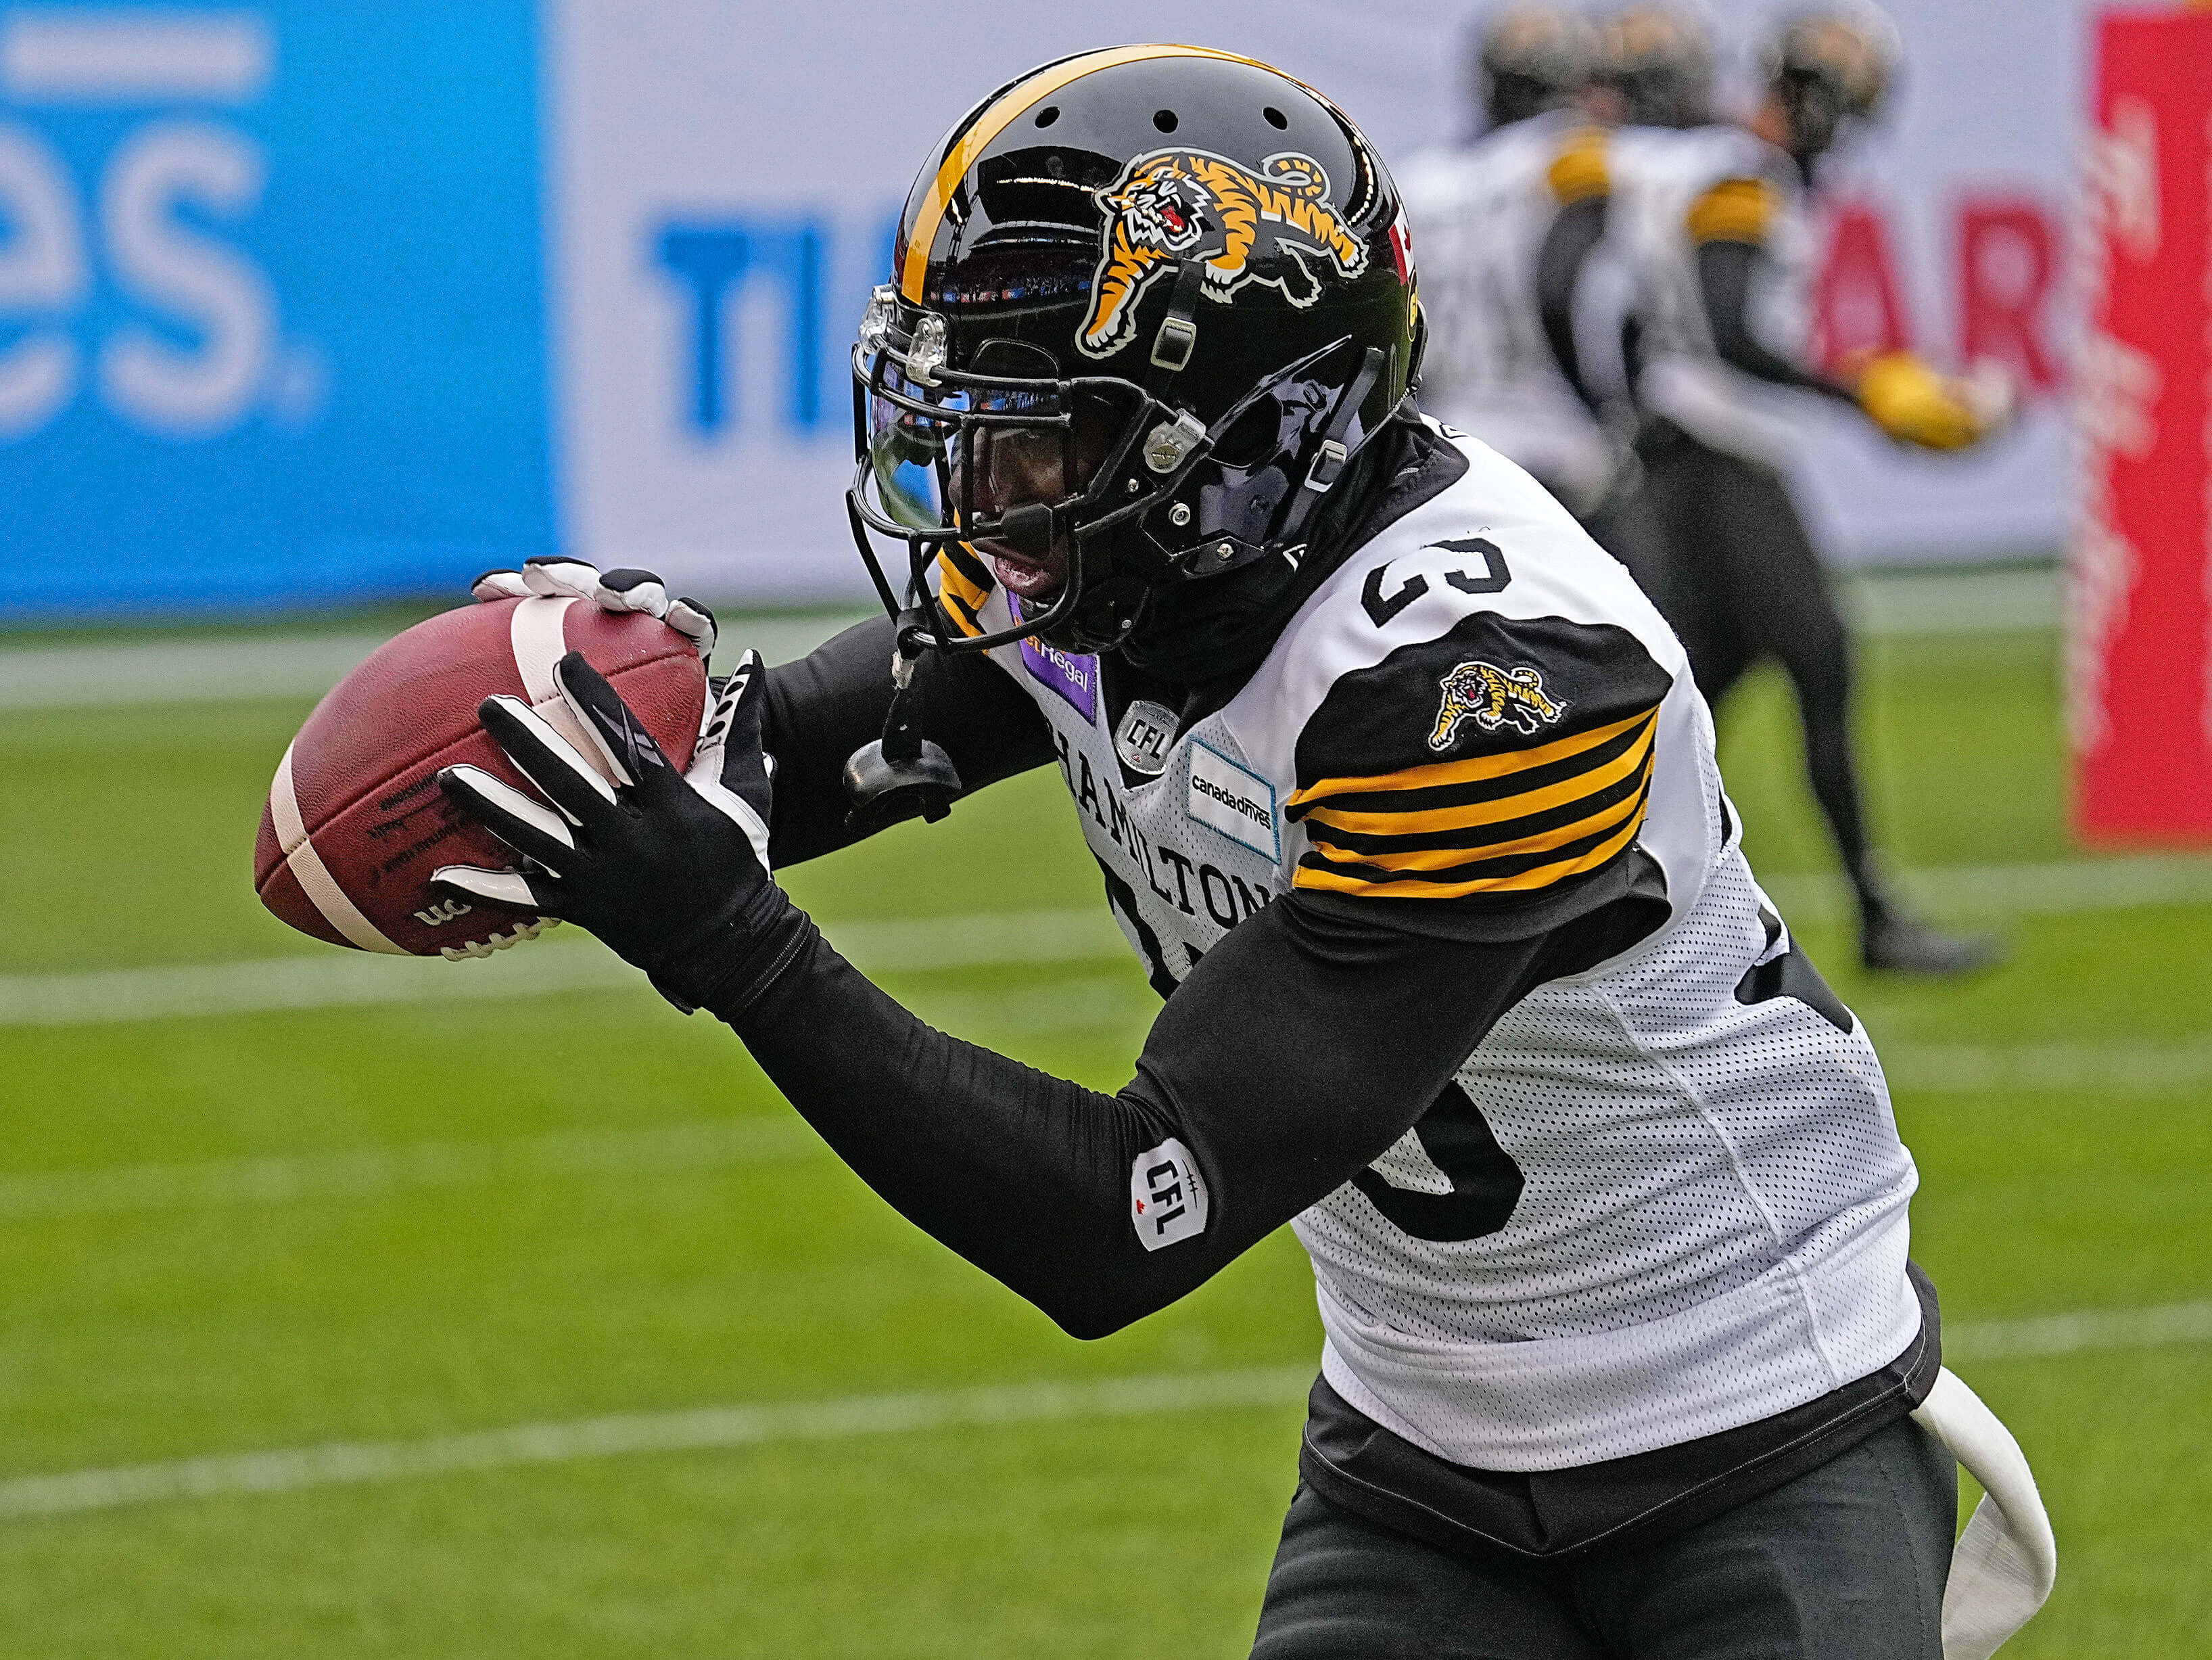 Tiger-Cats vs Alouettes Eastern Semi-Final Picks and Predictions: Momentum Is on Hamilton's Side